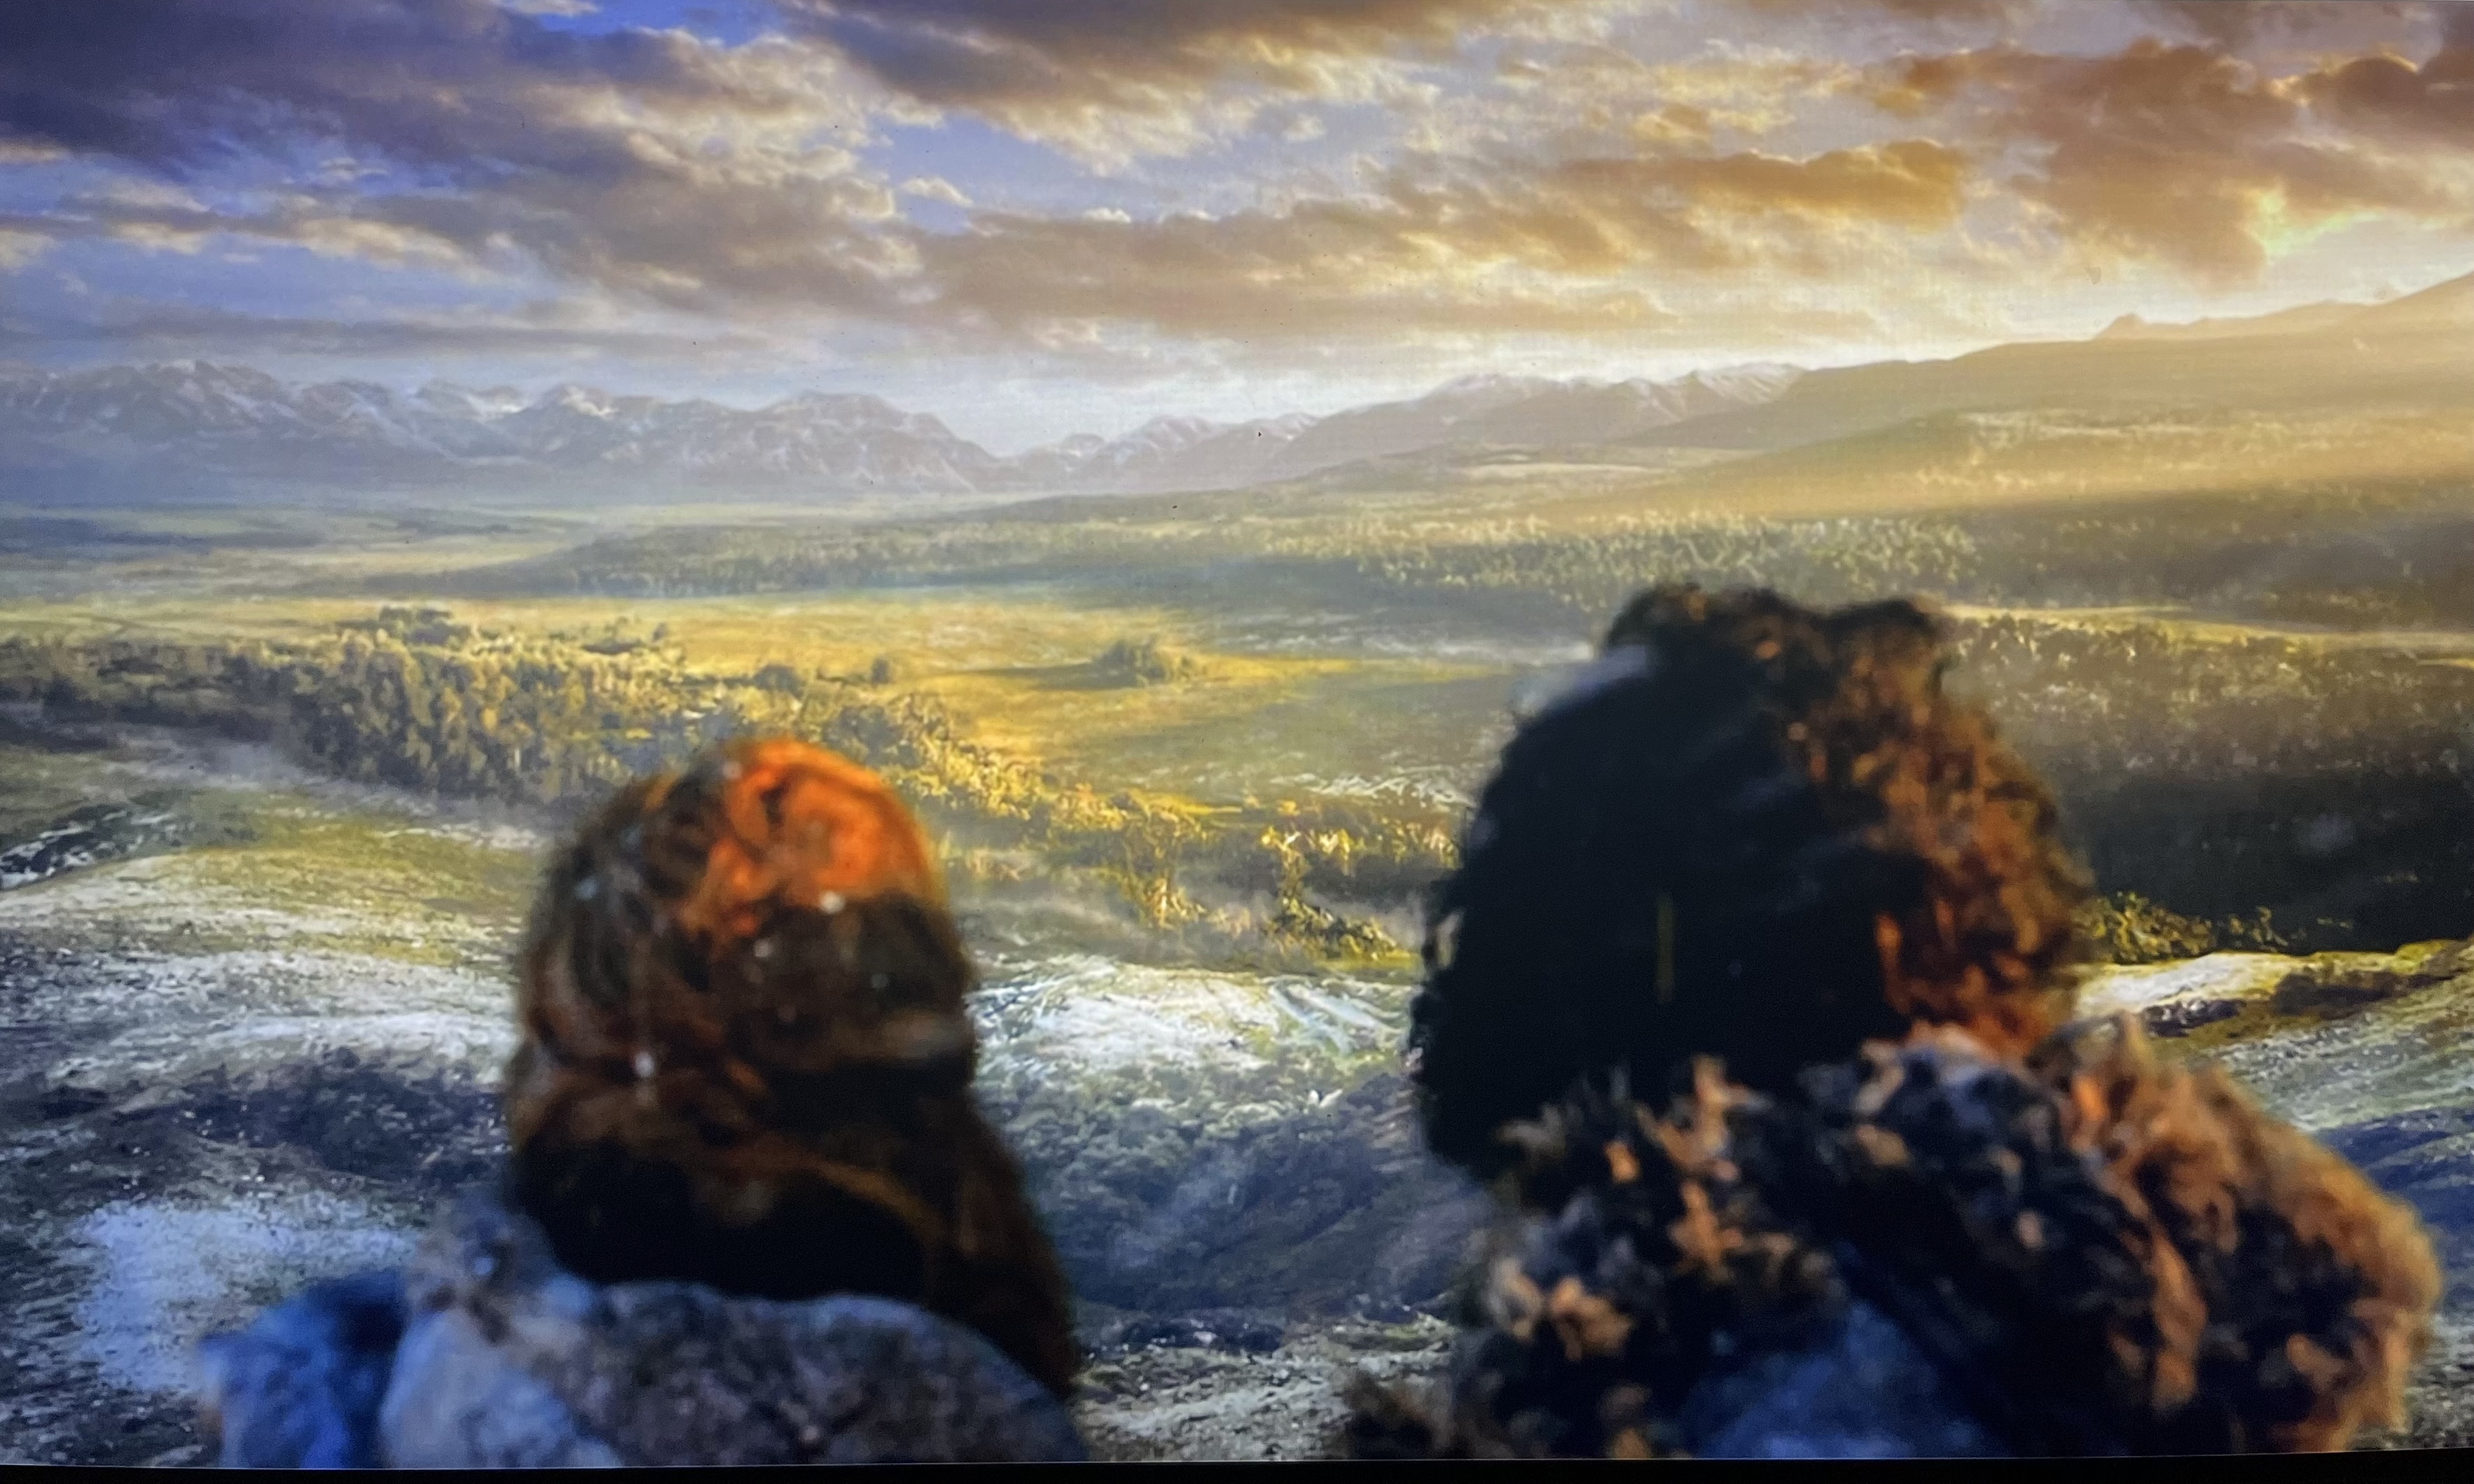 Jon Snow and Ygritte looking over Westeros after they climbed the wall